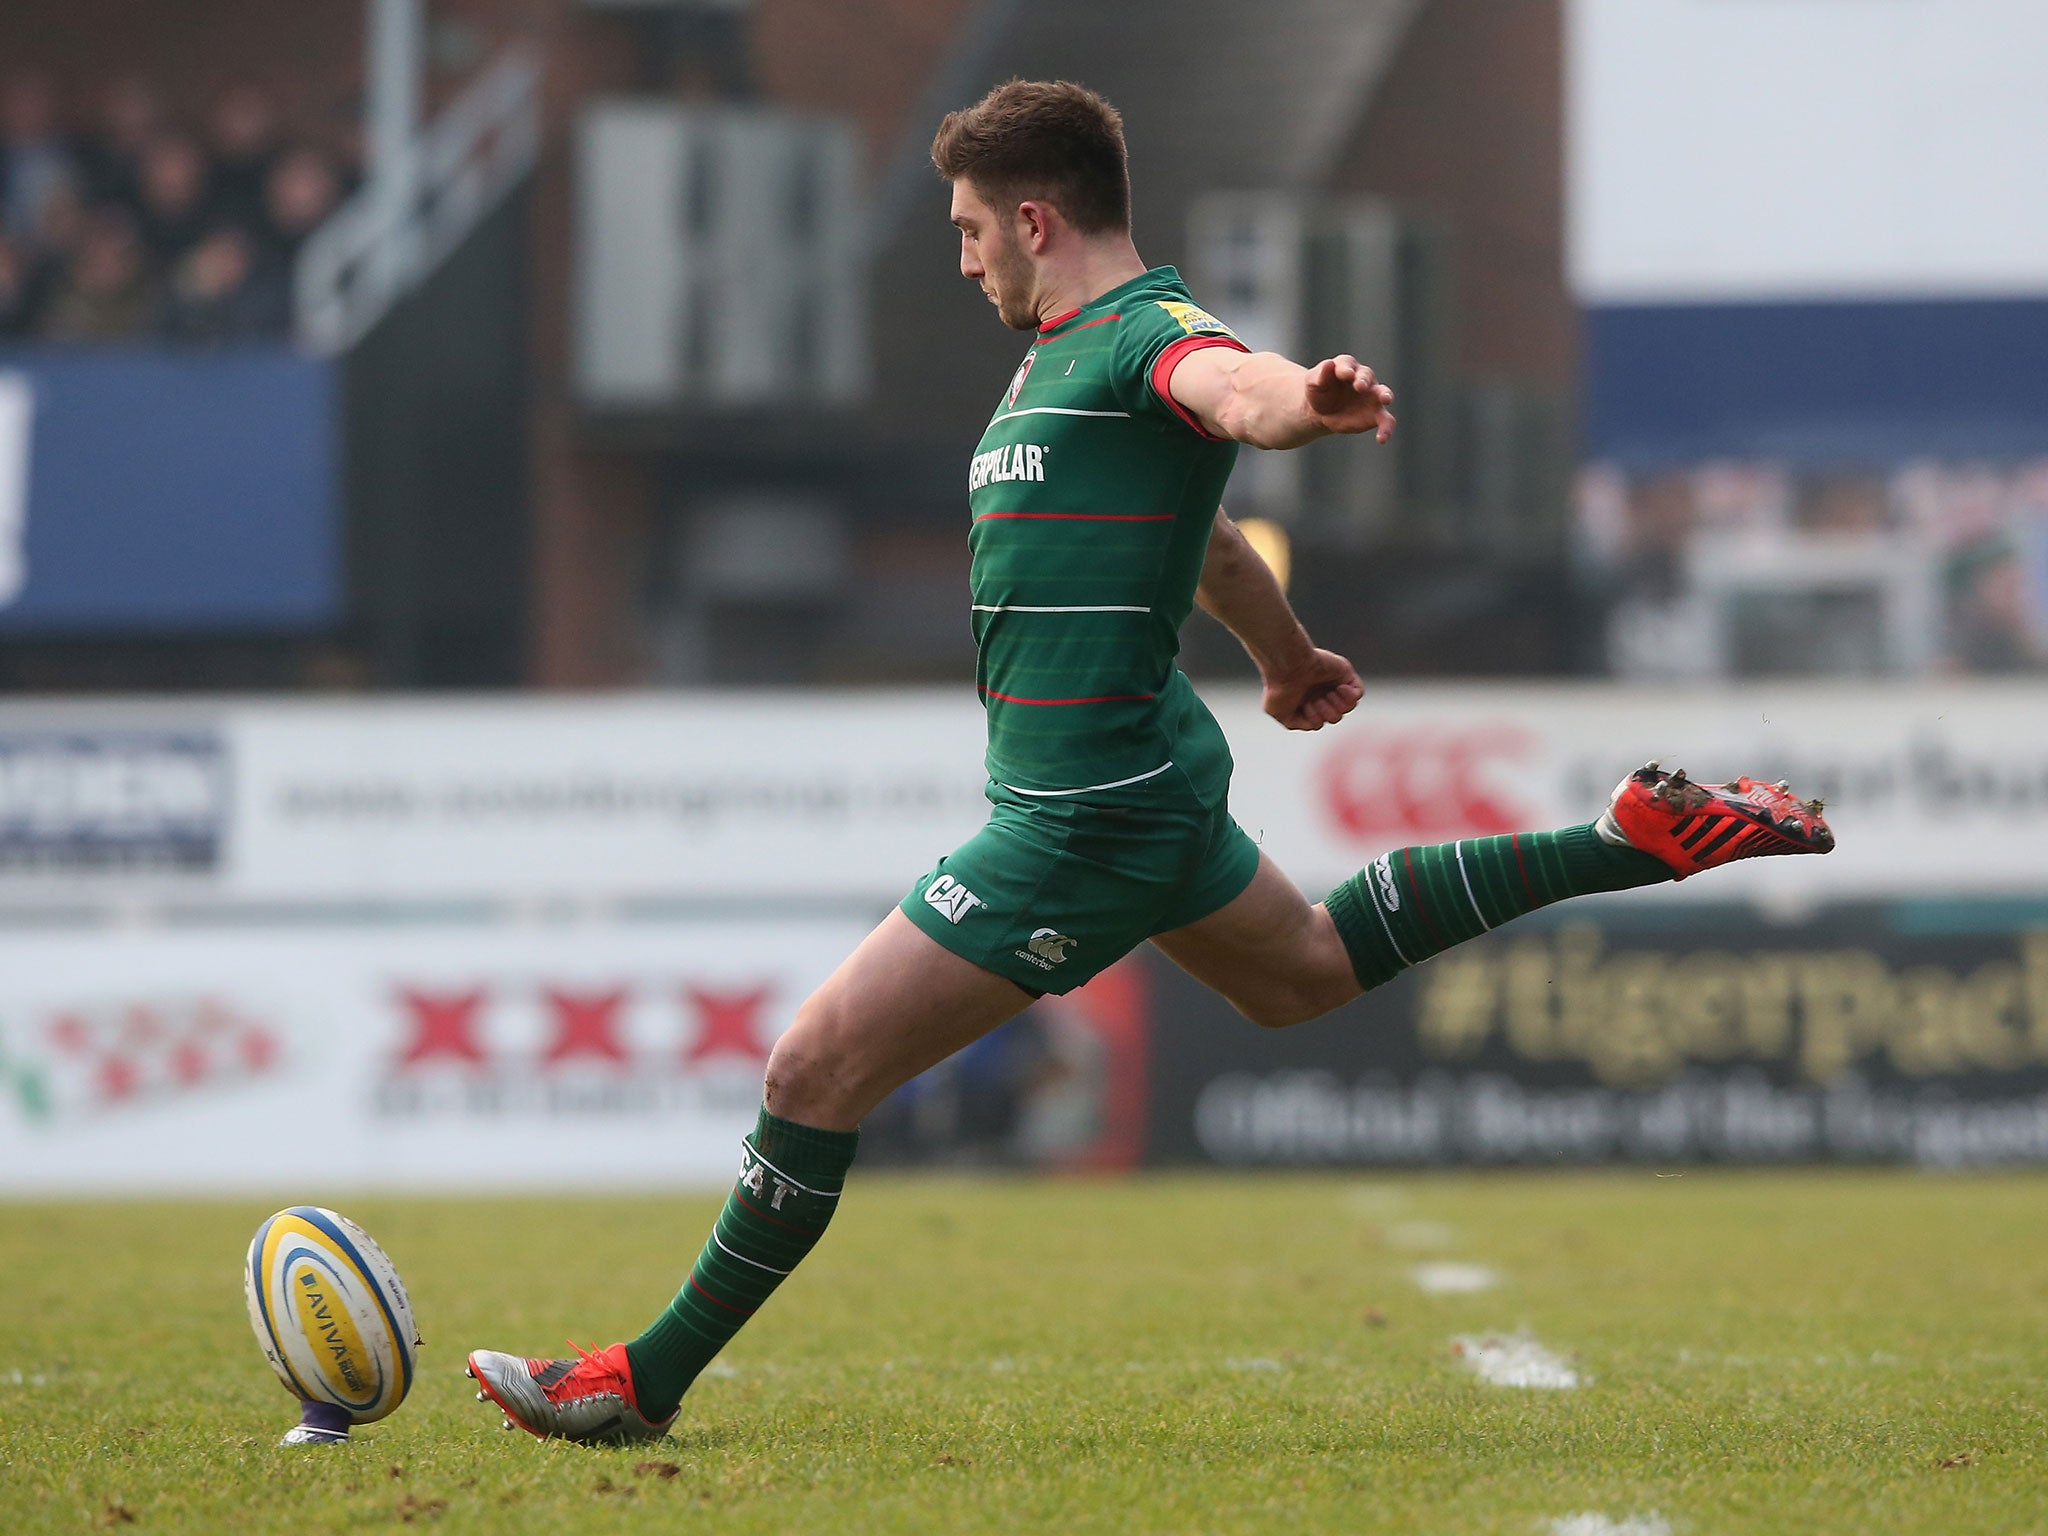 Owen Williams of Leicester kicks a penalty during the Aviva Premiership match between Leicester Tigers and Bath